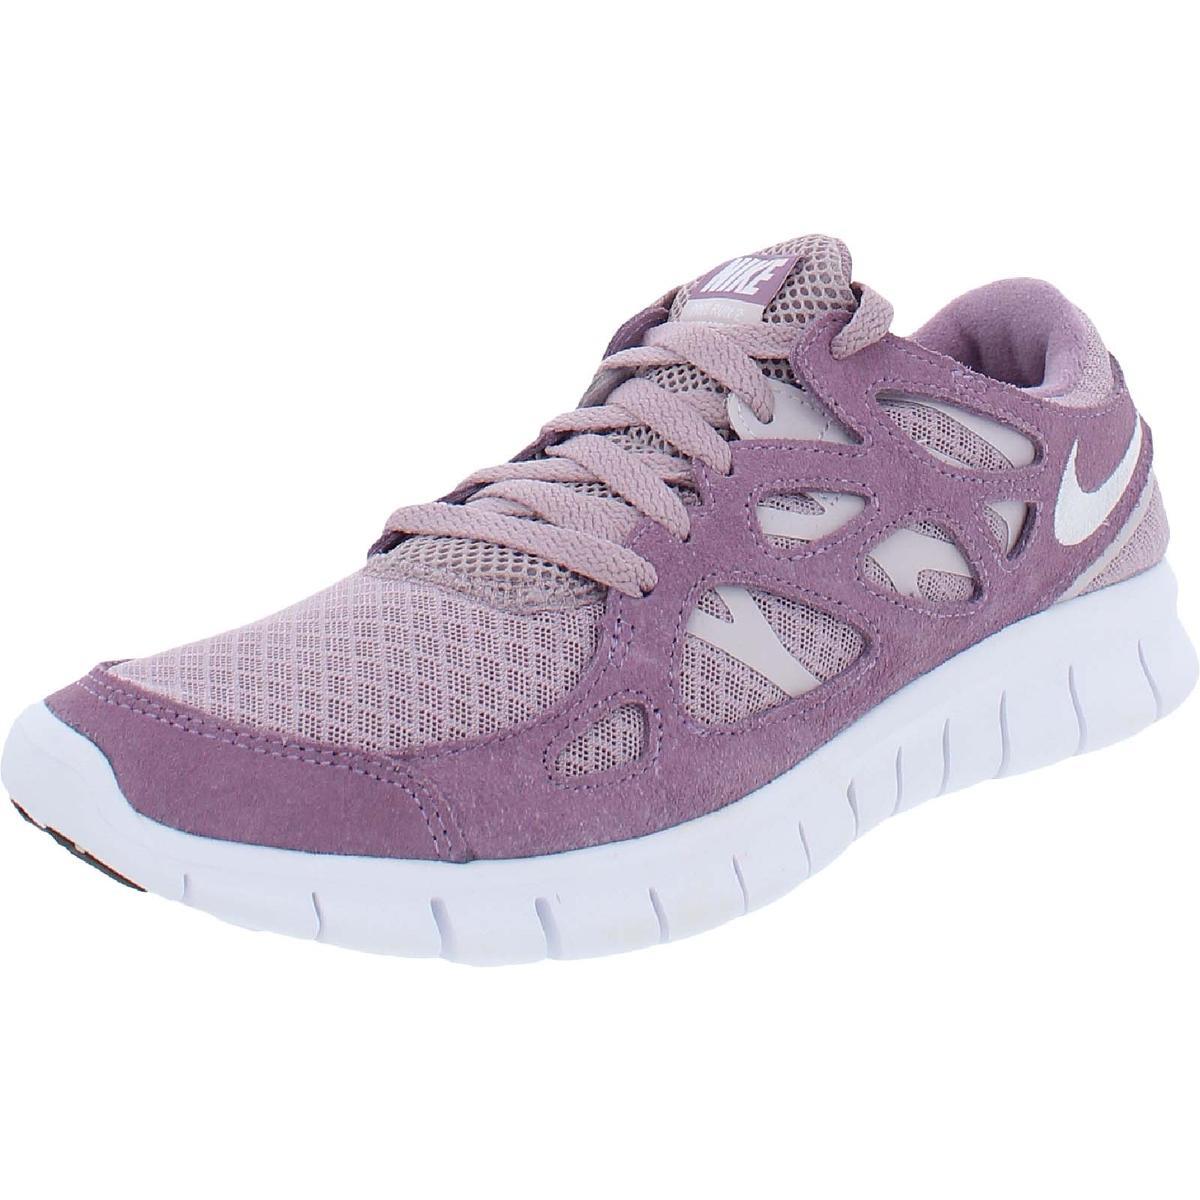 Nike Womens Suede Fitness Trainers Running Shoes Sneakers Bhfo 9239 Purple/Lilac